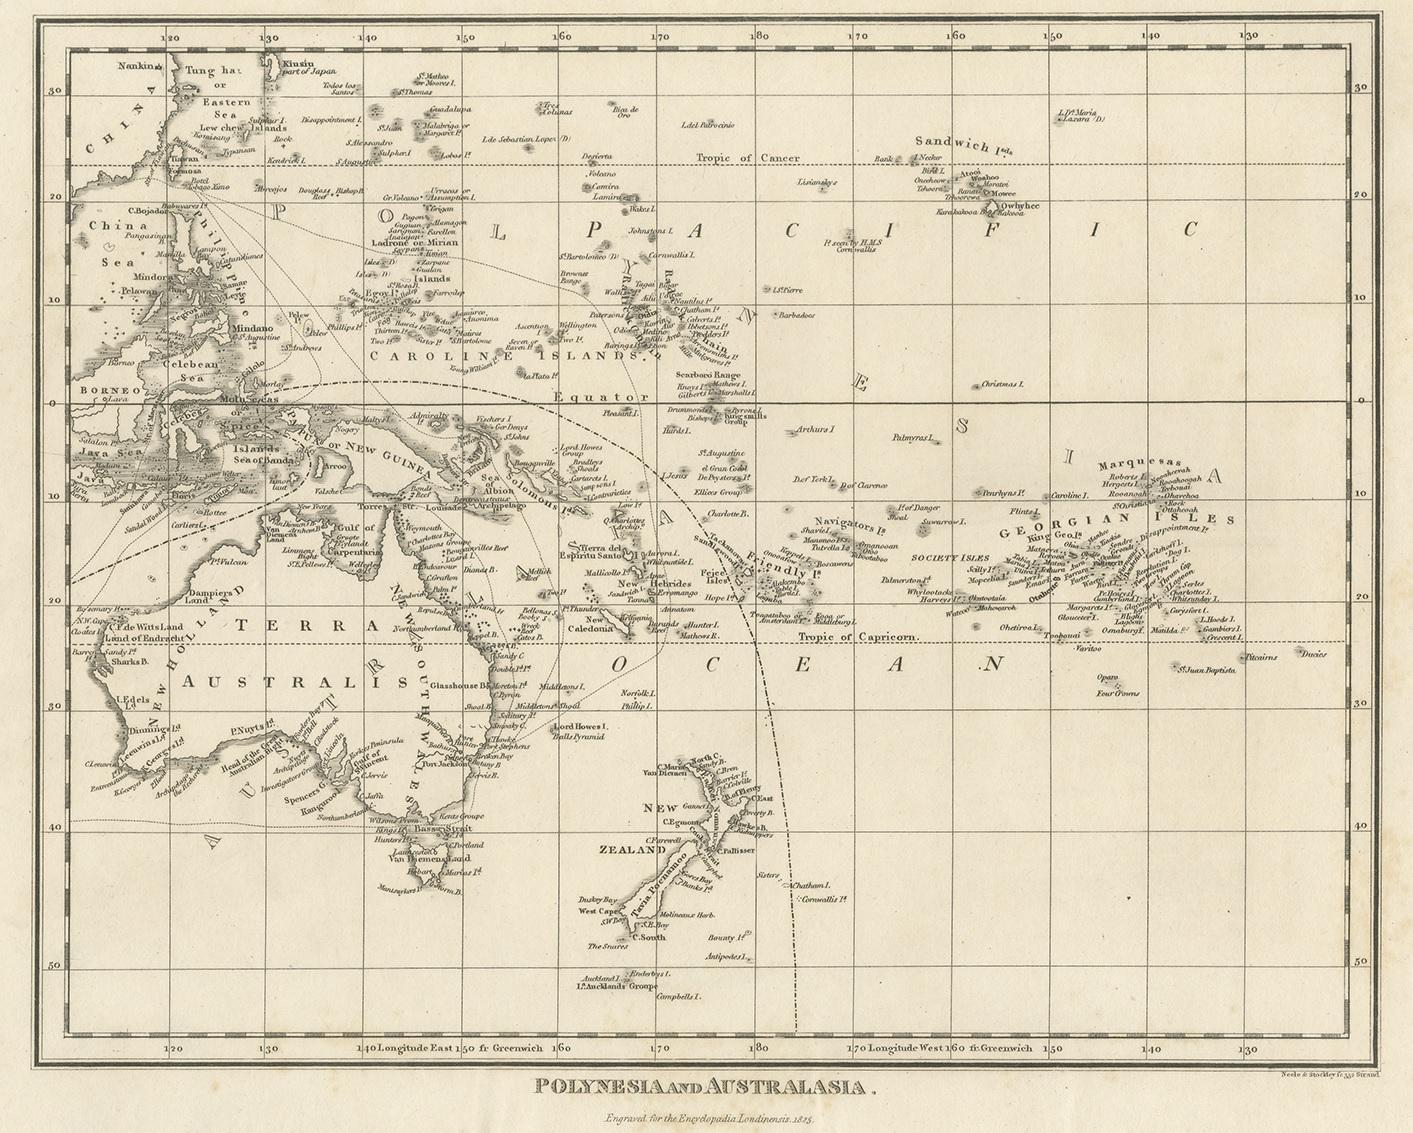 Antique map titled 'Polynesia and Australasia'. It shows Australia (New Holland), part of Asia, New Zealand and many islands. This map originates from 'Encyclopedia Londinensis'.